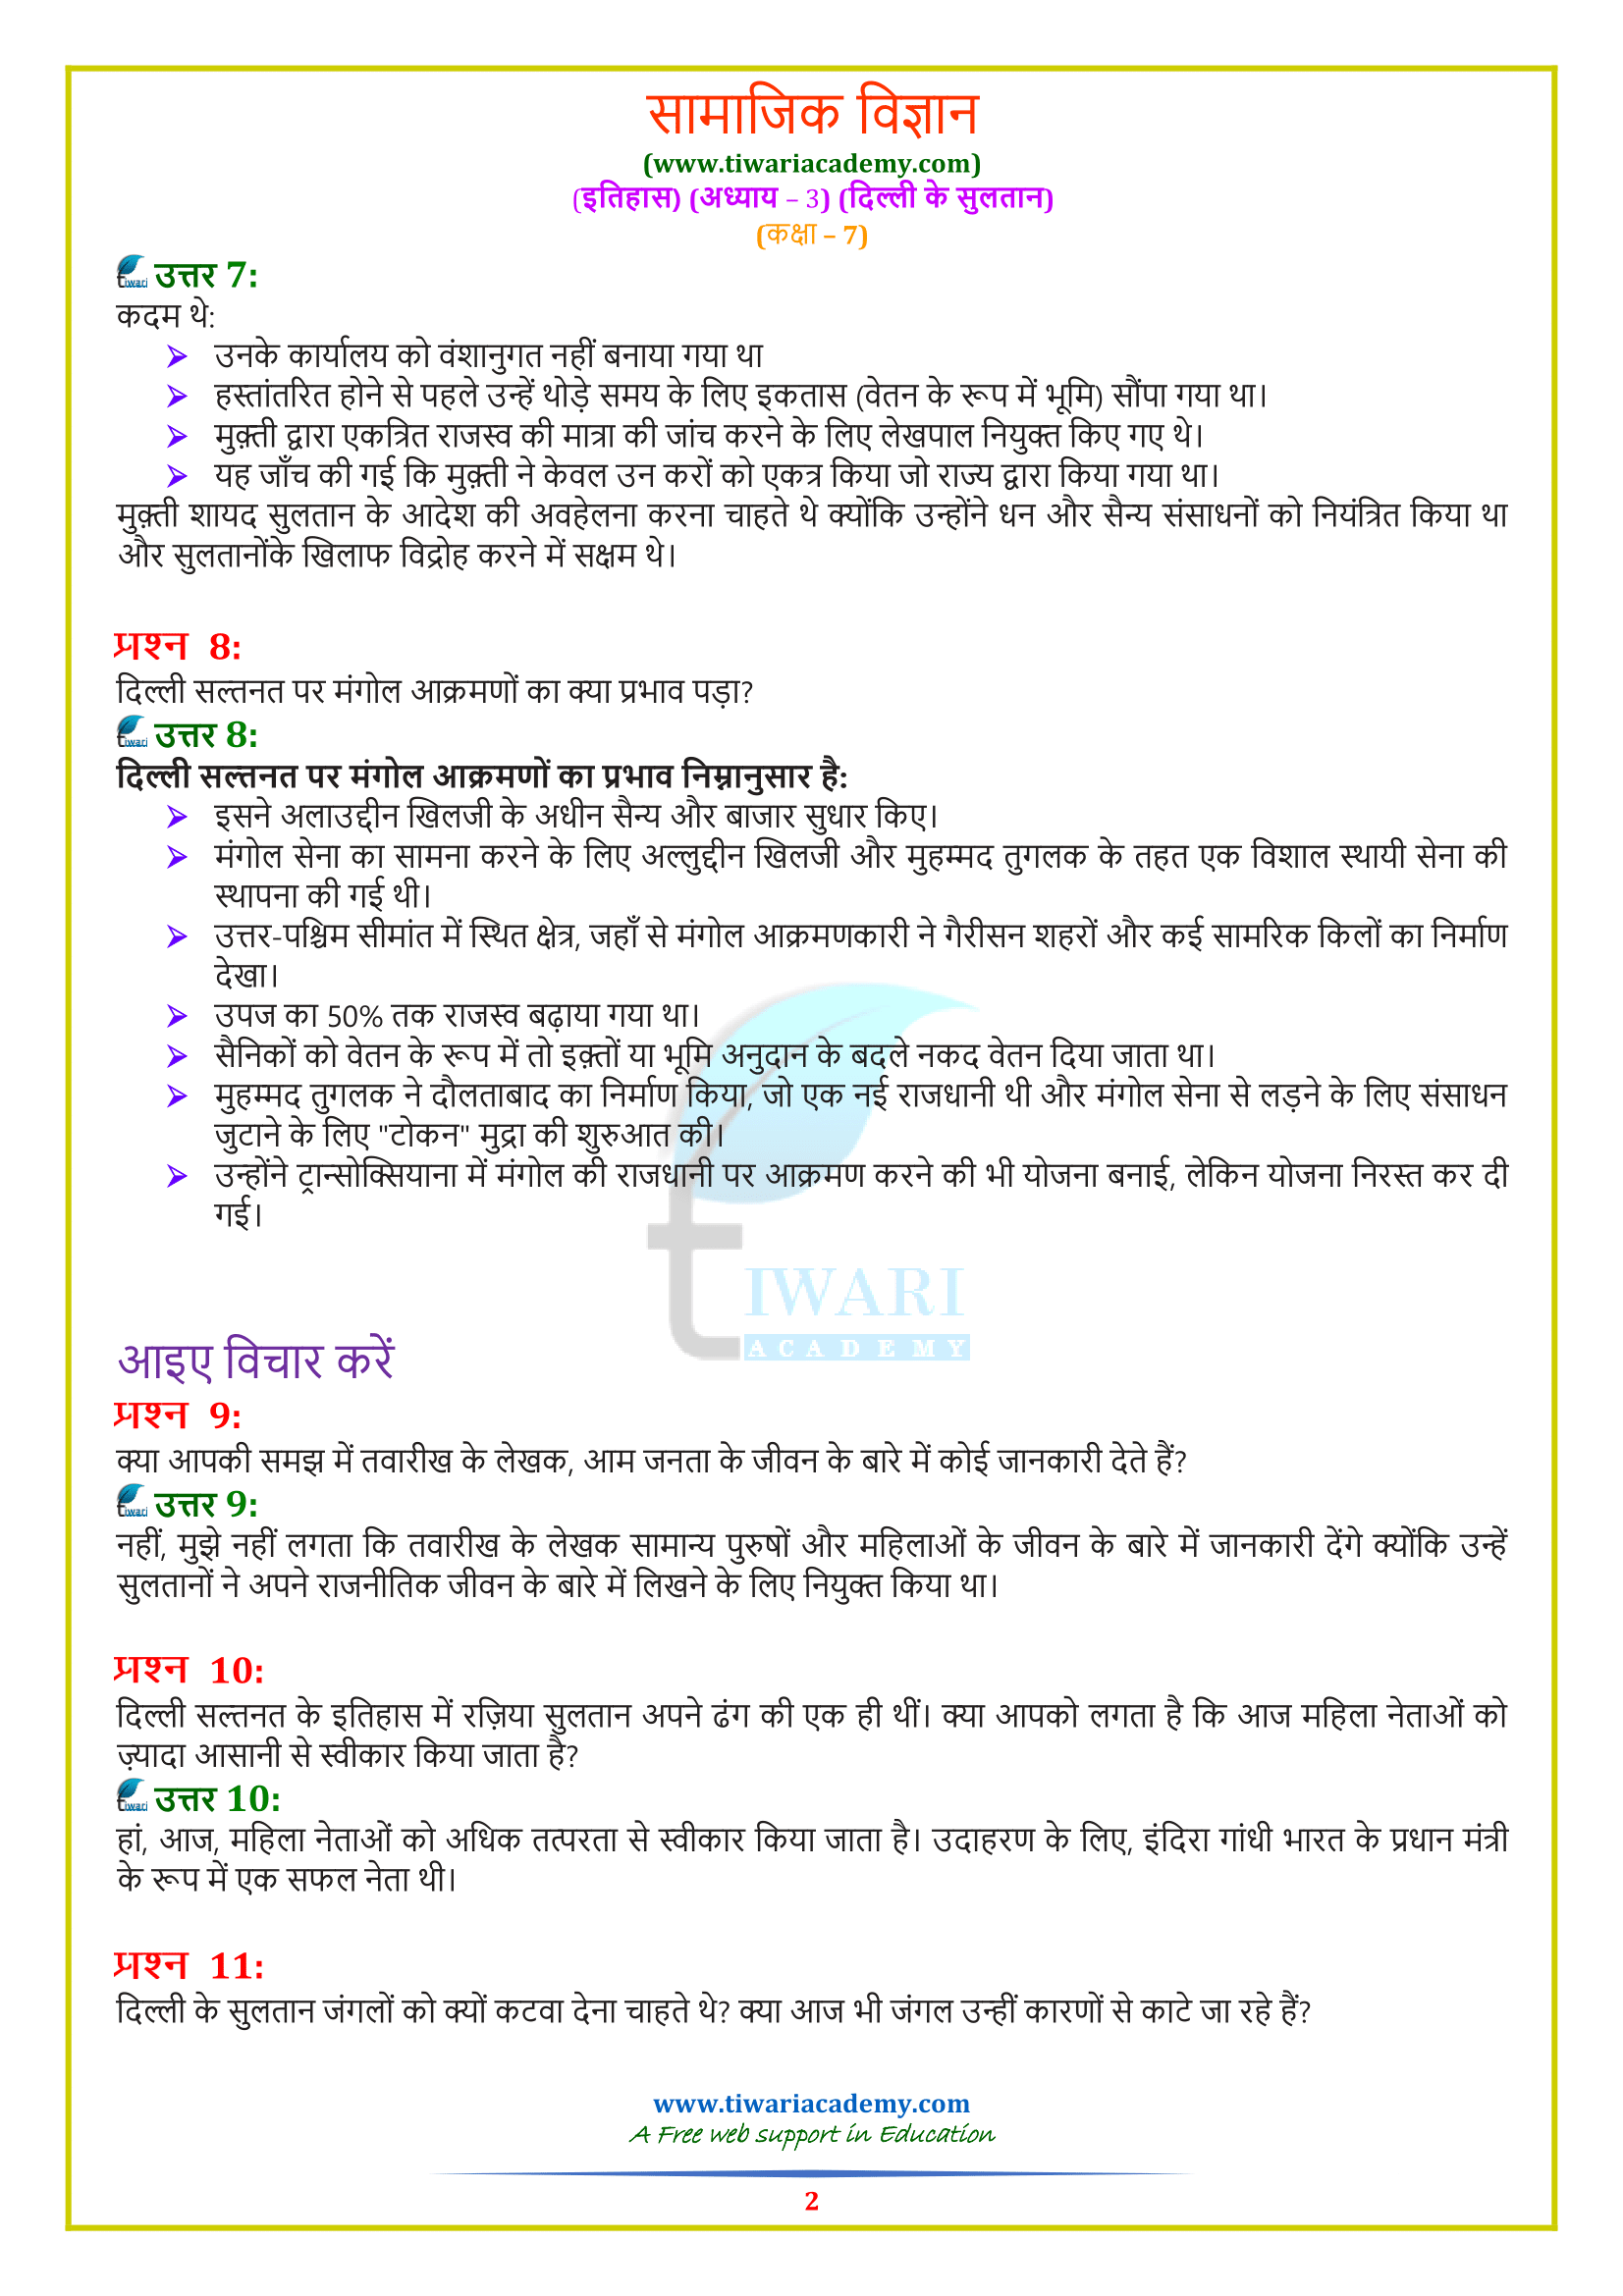 NCERT Solutions for class 7 History chapter 3 in Hindi Medium